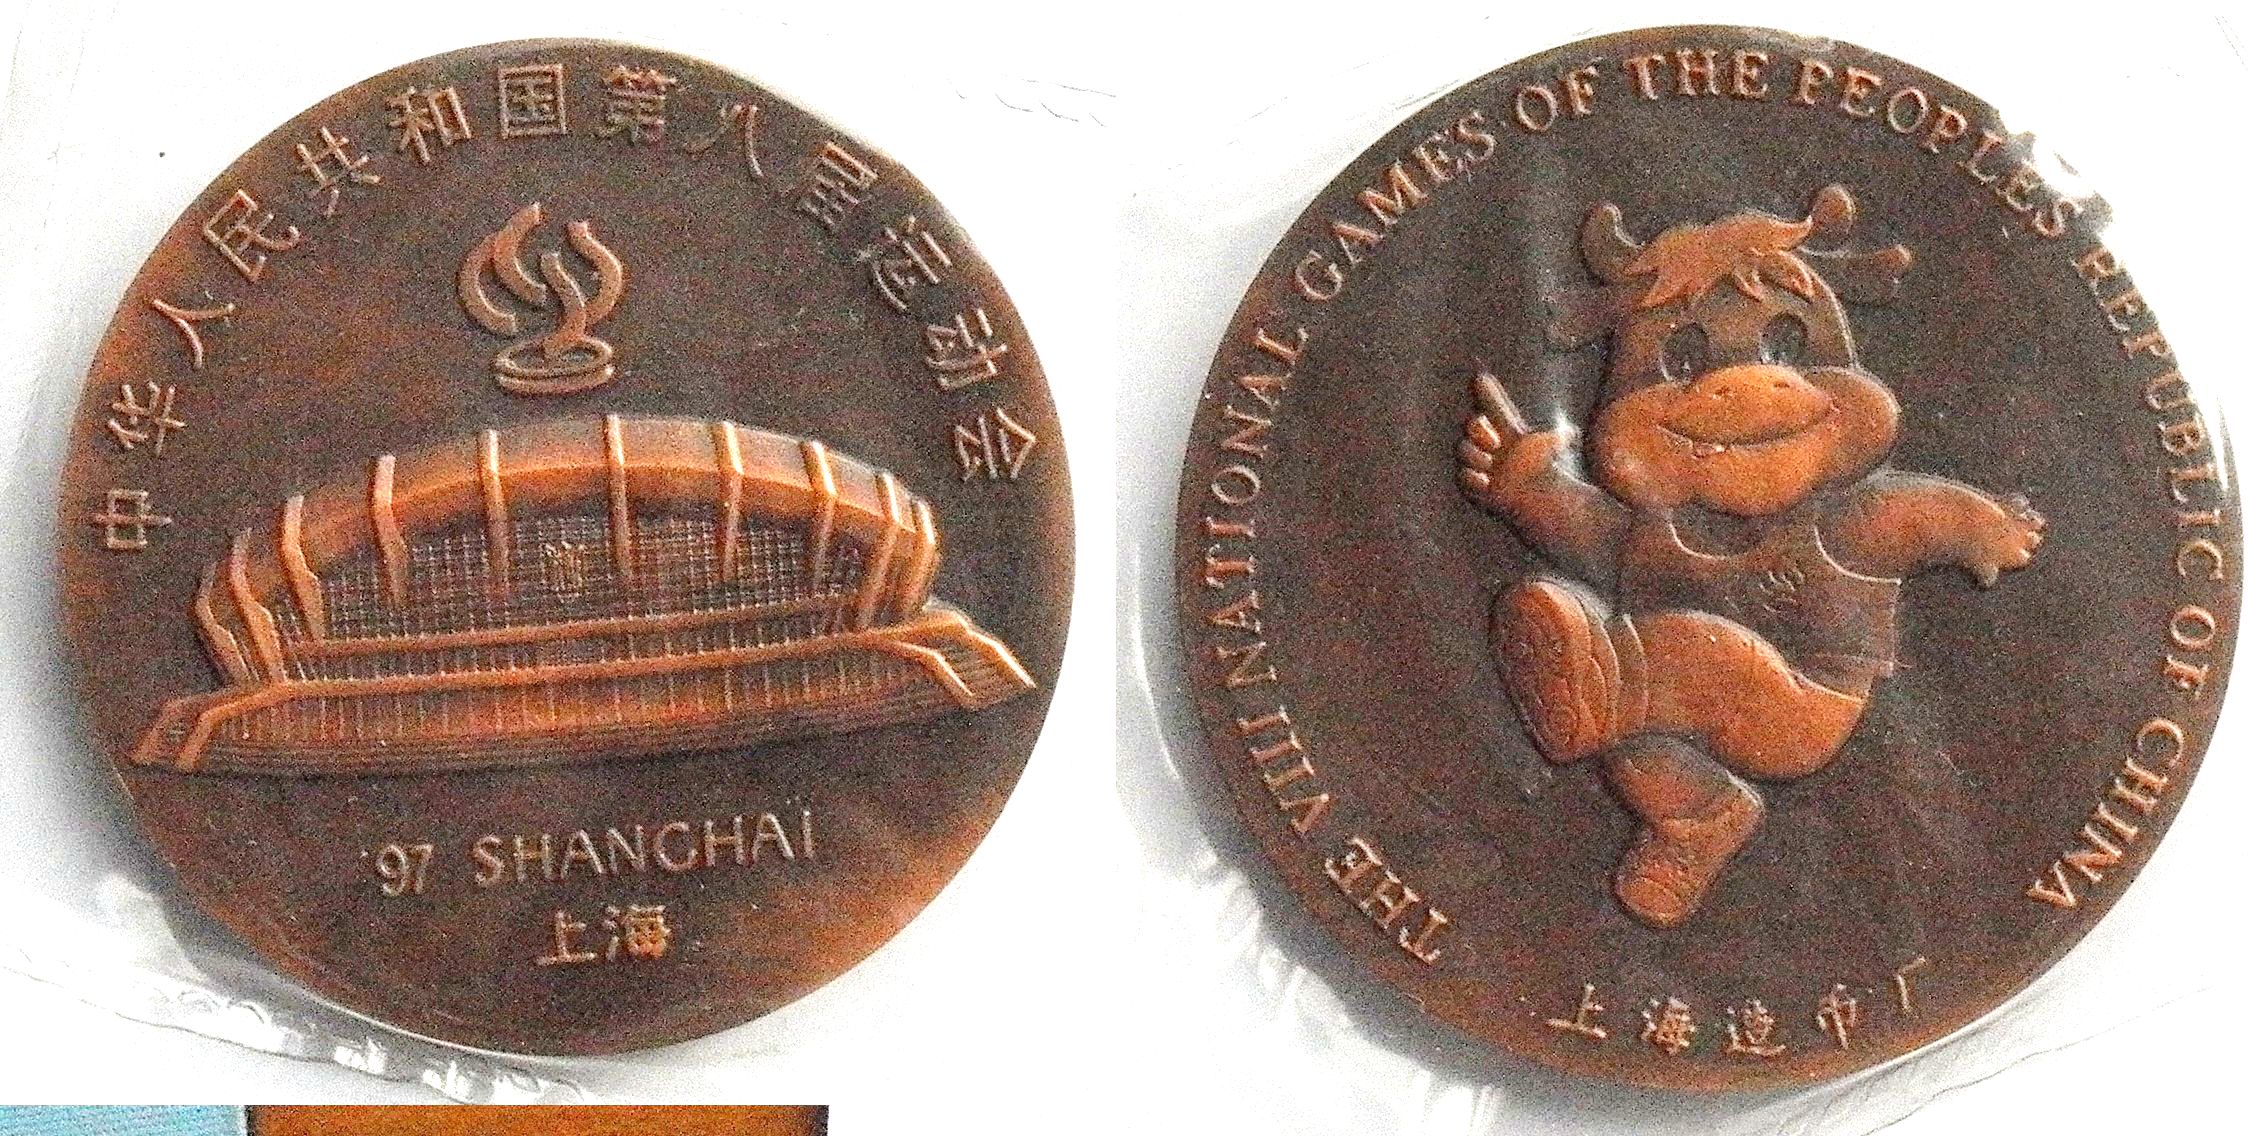 K8512, Large Bronze Medal, the 8th National Games of China, 1997 Shanghai